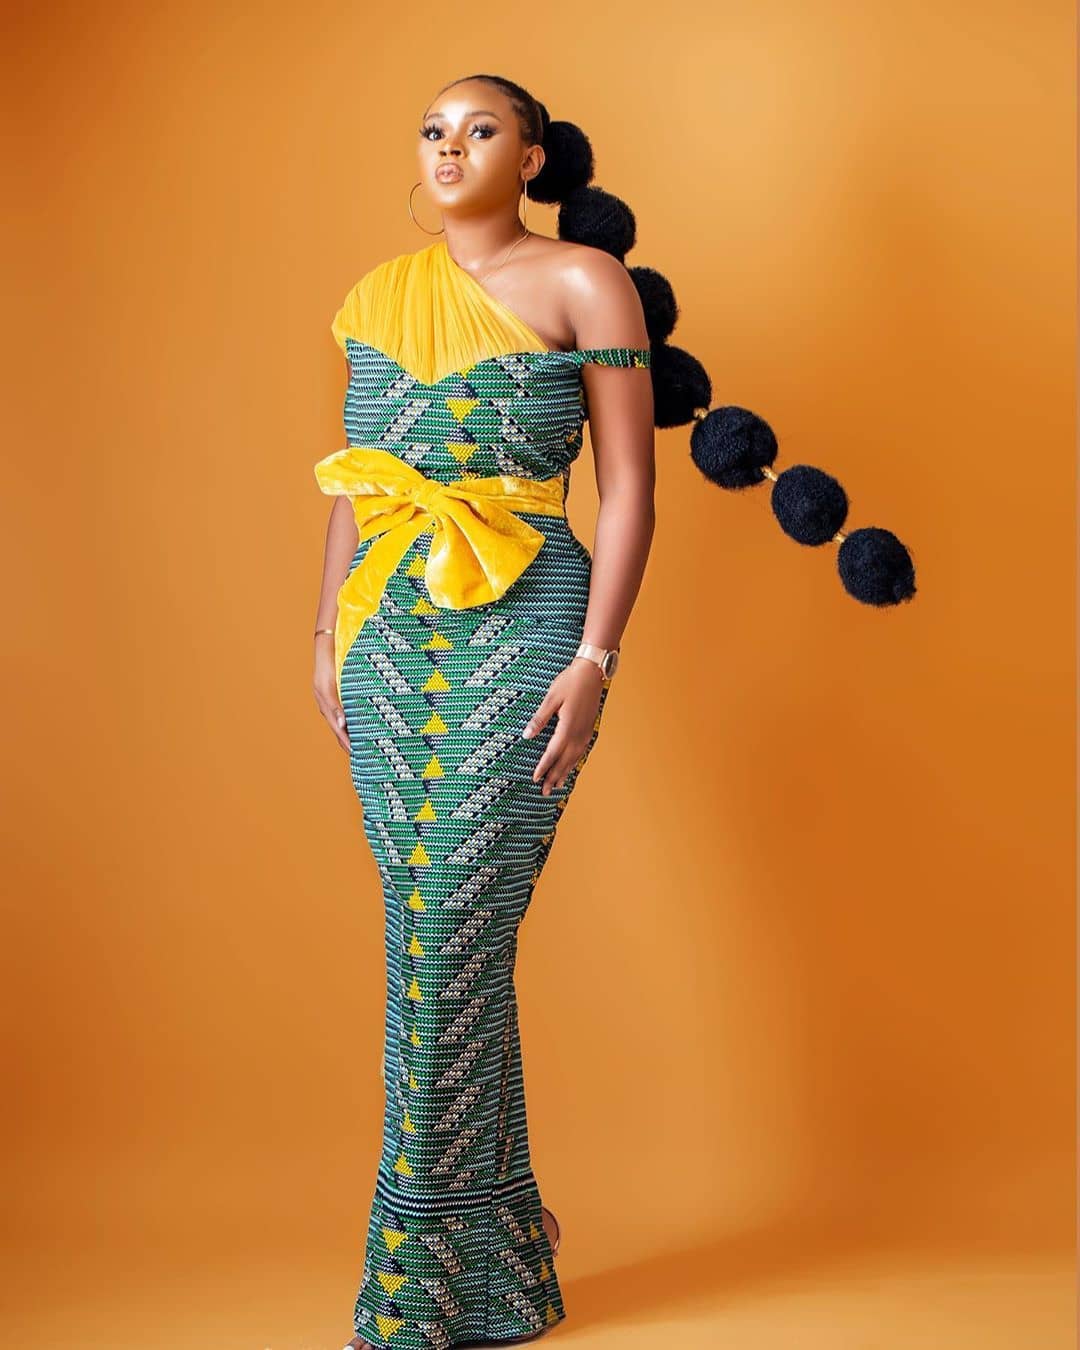 TOP ANKARA FASHION HOT STYLES FOR AFRICAN LADY OUTSTANDING!